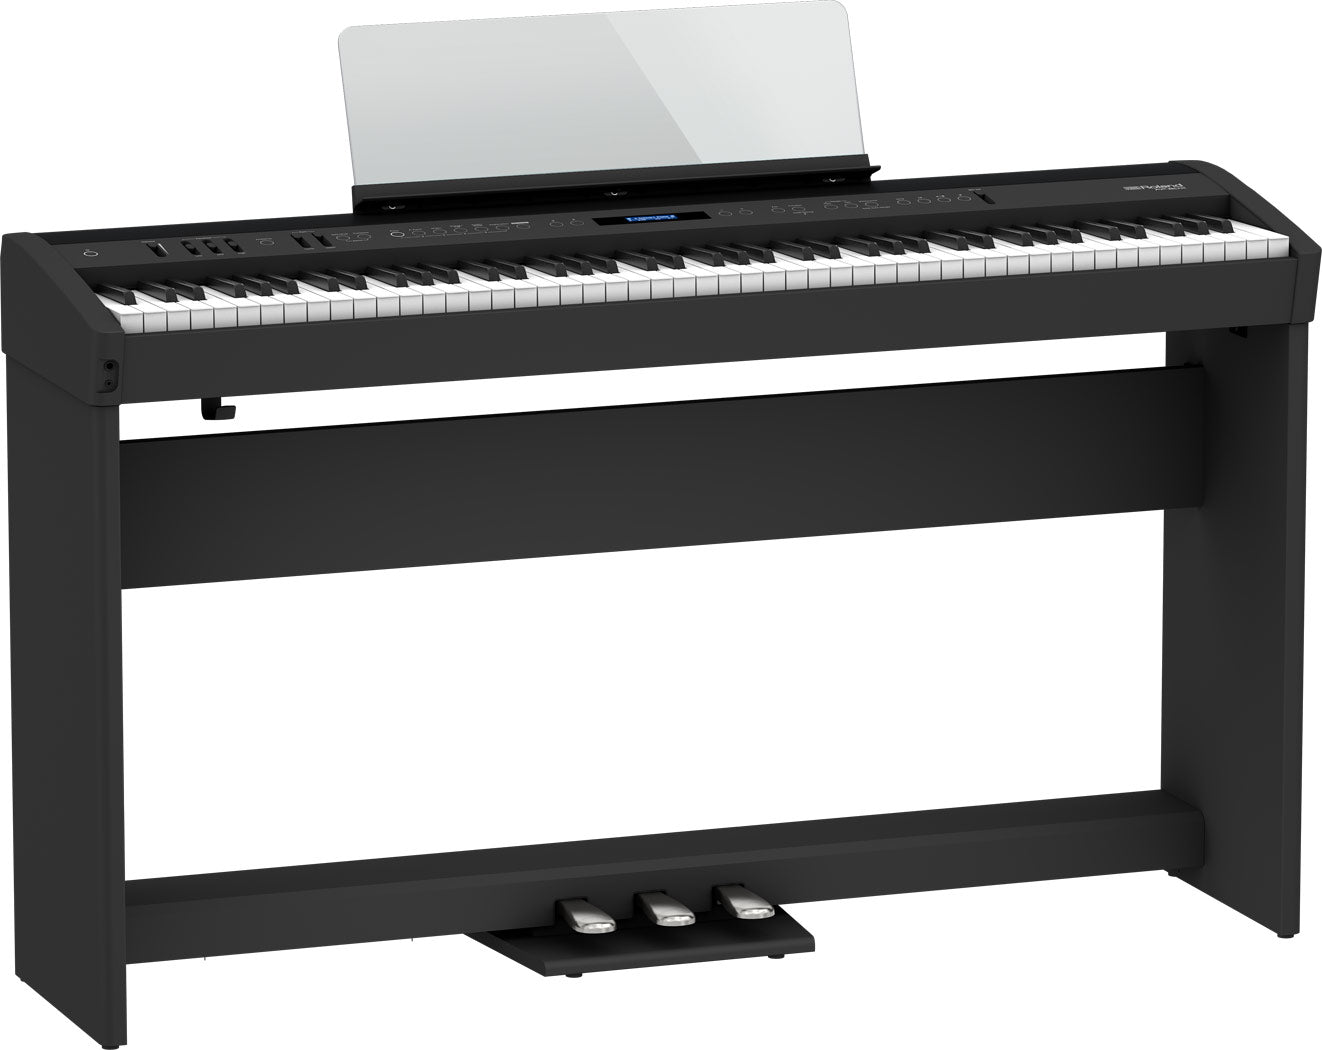 Roland FP-60X 88-key Digital Piano Home Package with Piano Bench, RH-5 Headphone, Pedals and Piano Stand - Black (FP60X / FP 60X), ROLAND, DIGITAL PIANO, roland-digital-piano-fp60x-bk, ZOSO MUSIC SDN BHD